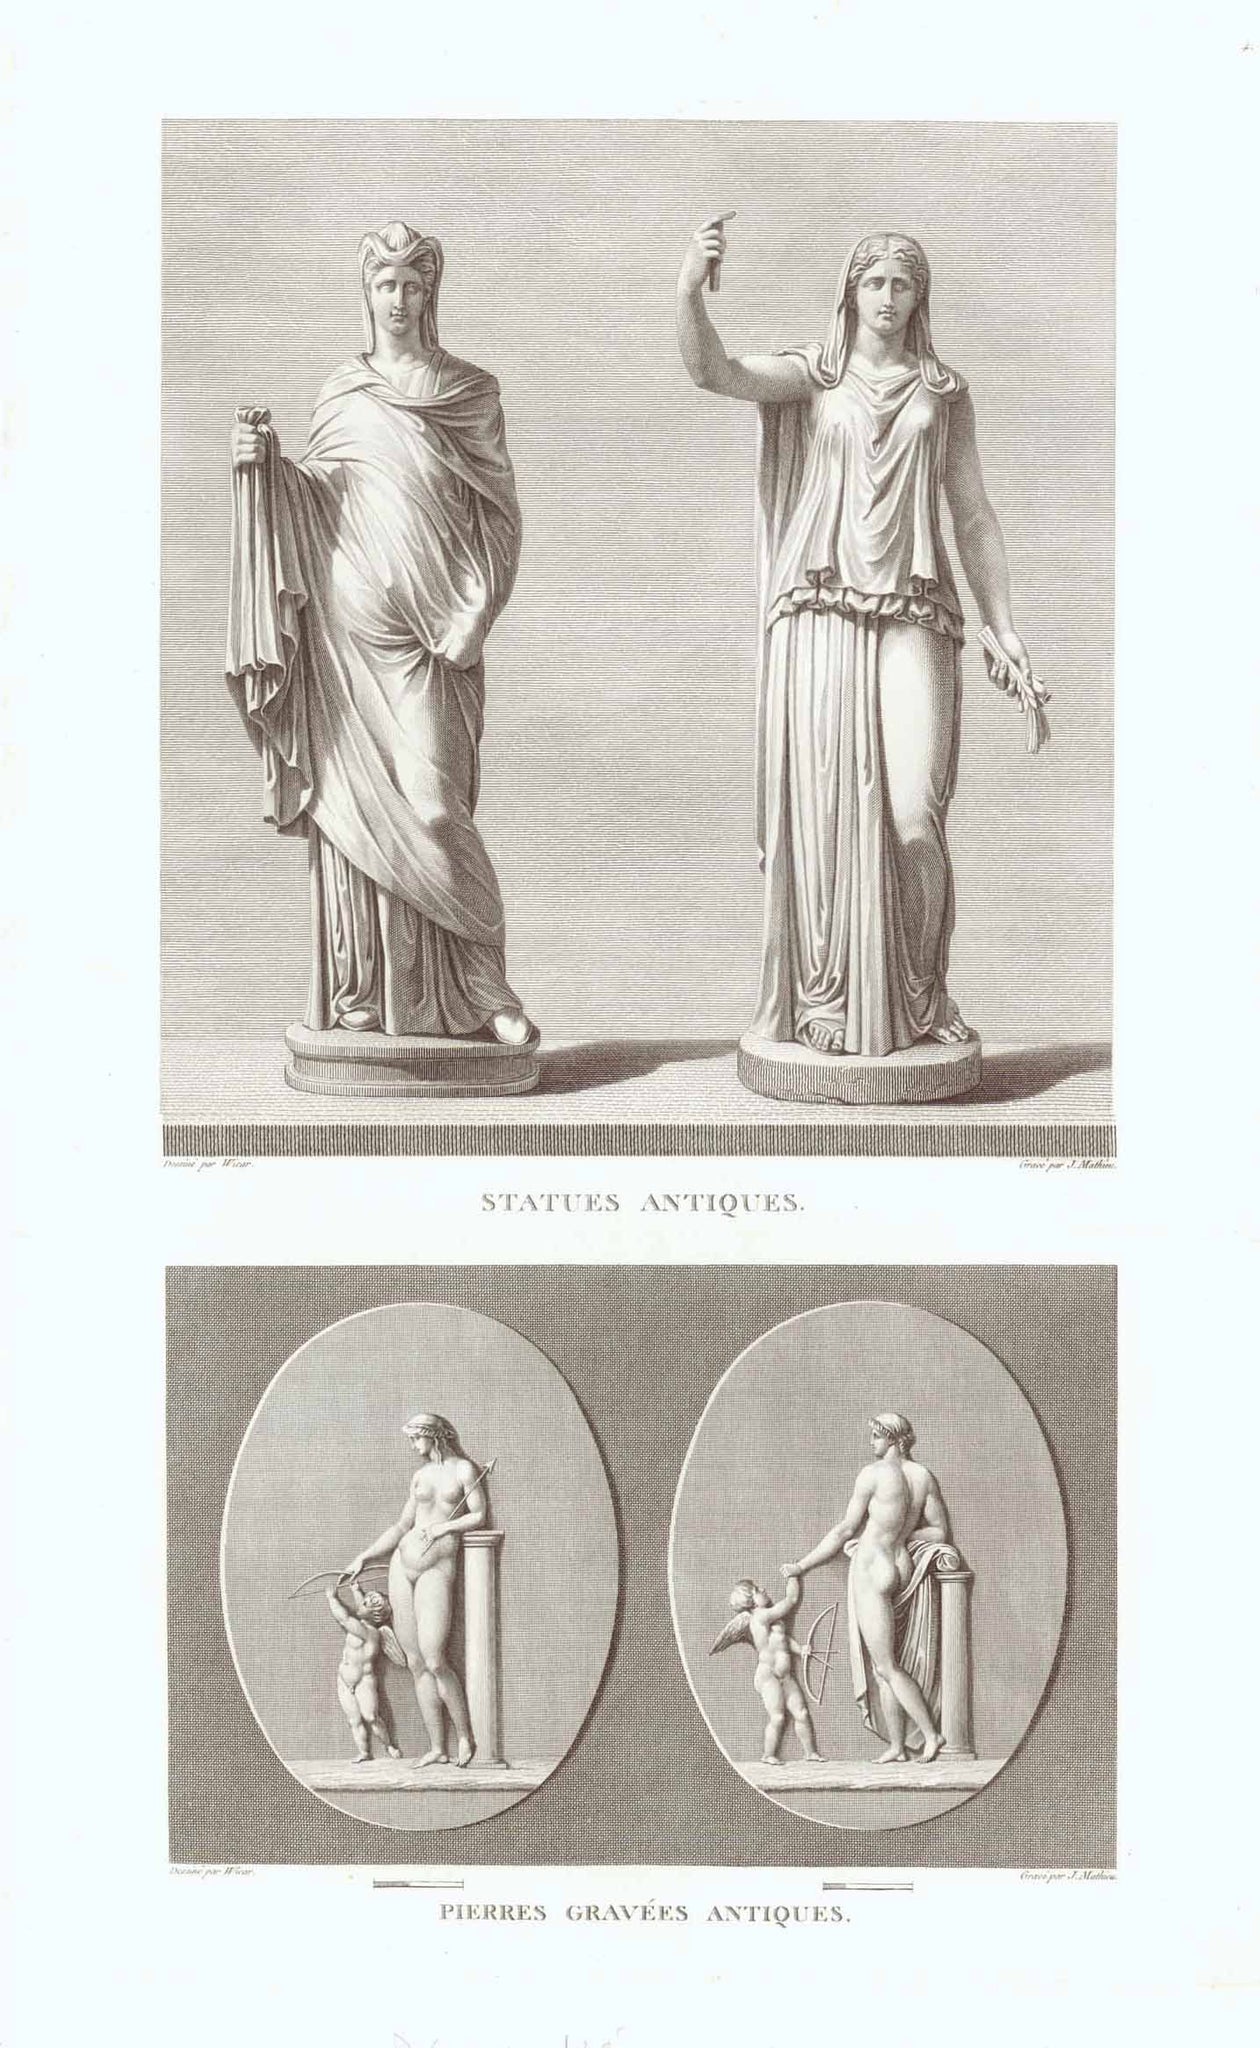 "Image of Loyalty" - "Statue einer Frau"  Below: Two medaillons showing Amor aiming his arrow at a young woman  Copper etchings by M. Mathieu  after the drawing by Jean Baptiste Vicar (1762-1834)  Published in "Tableaux, statues, bas-reliefs et camees de la Galerie de Florence et du Palais Pitti"  Florence, 1789-1814  Original antique print   Very good condition